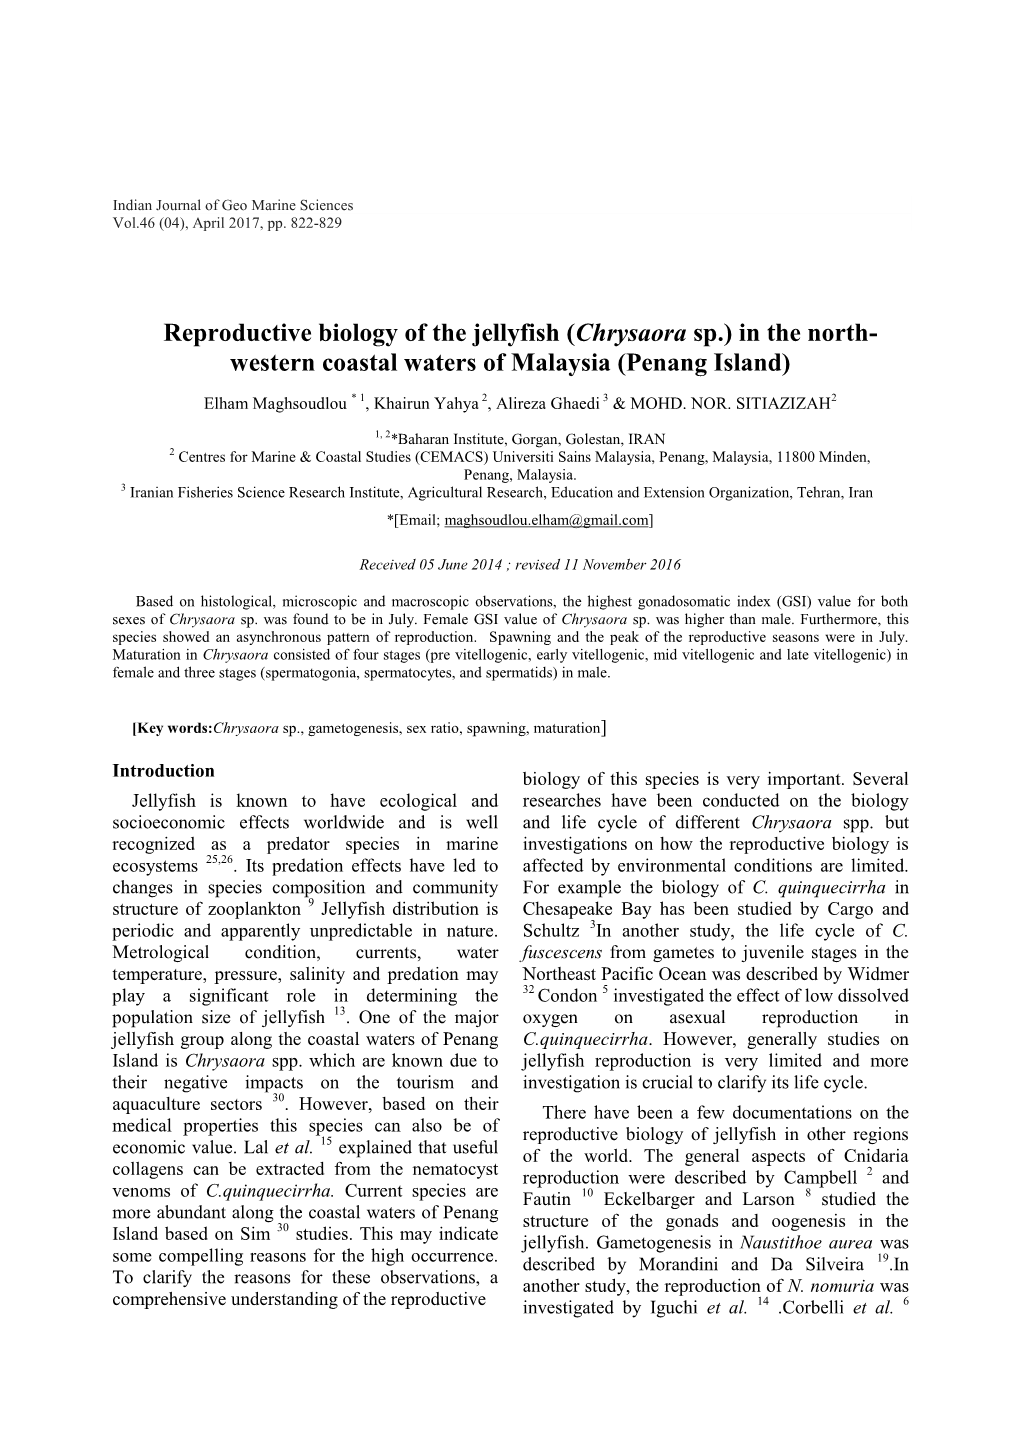 Reproductive Biology of the Jellyfish (Chrysaora Sp.) in the North- Western Coastal Waters of Malaysia (Penang Island)